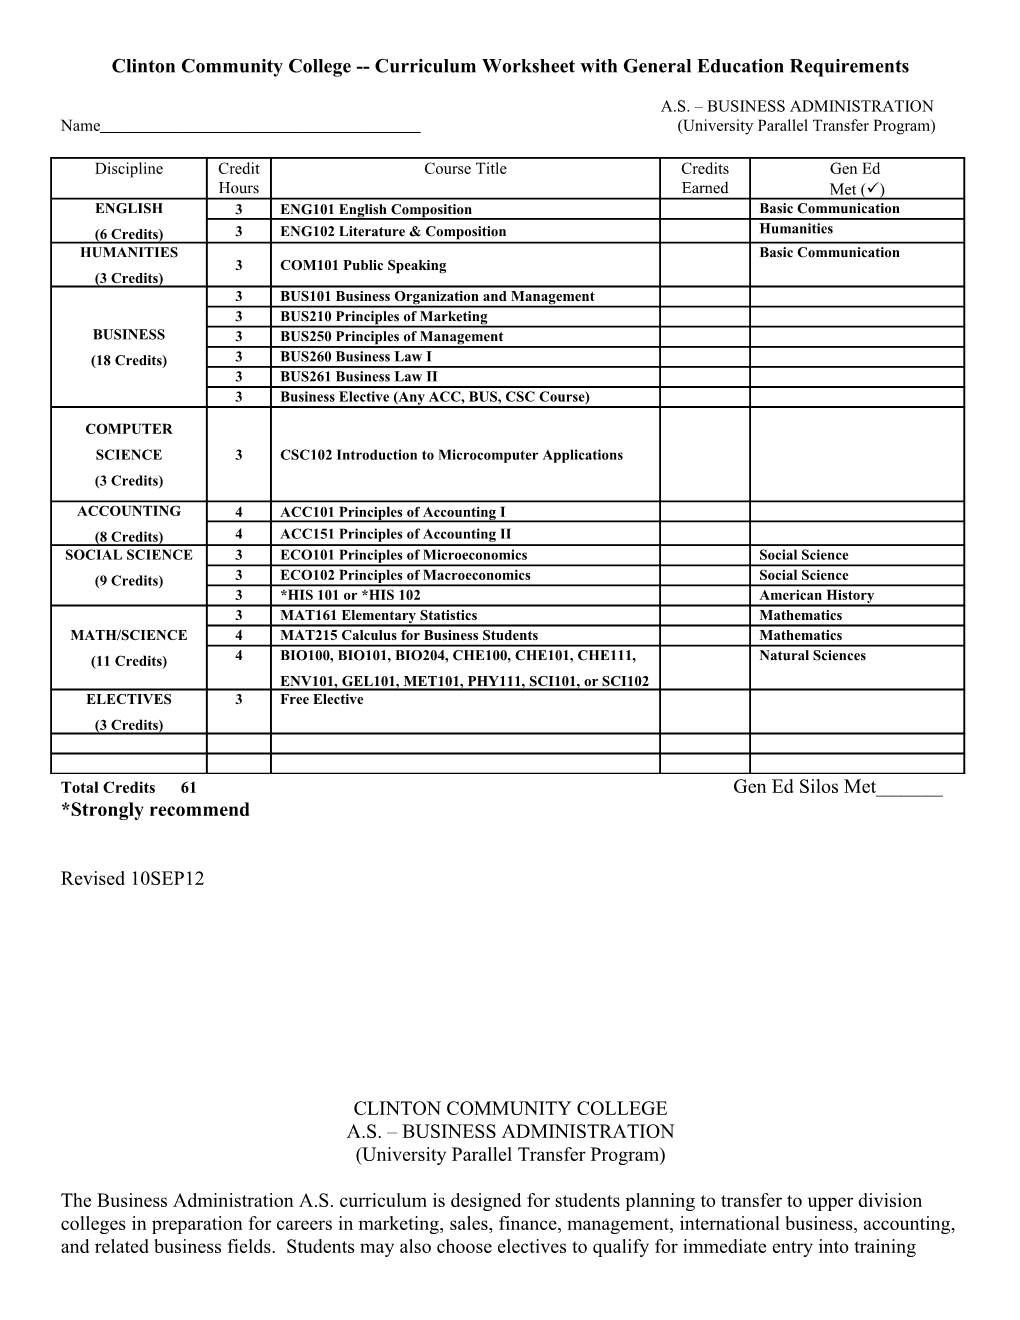 Clinton Community College Curriculum Worksheet with General Education Requirements